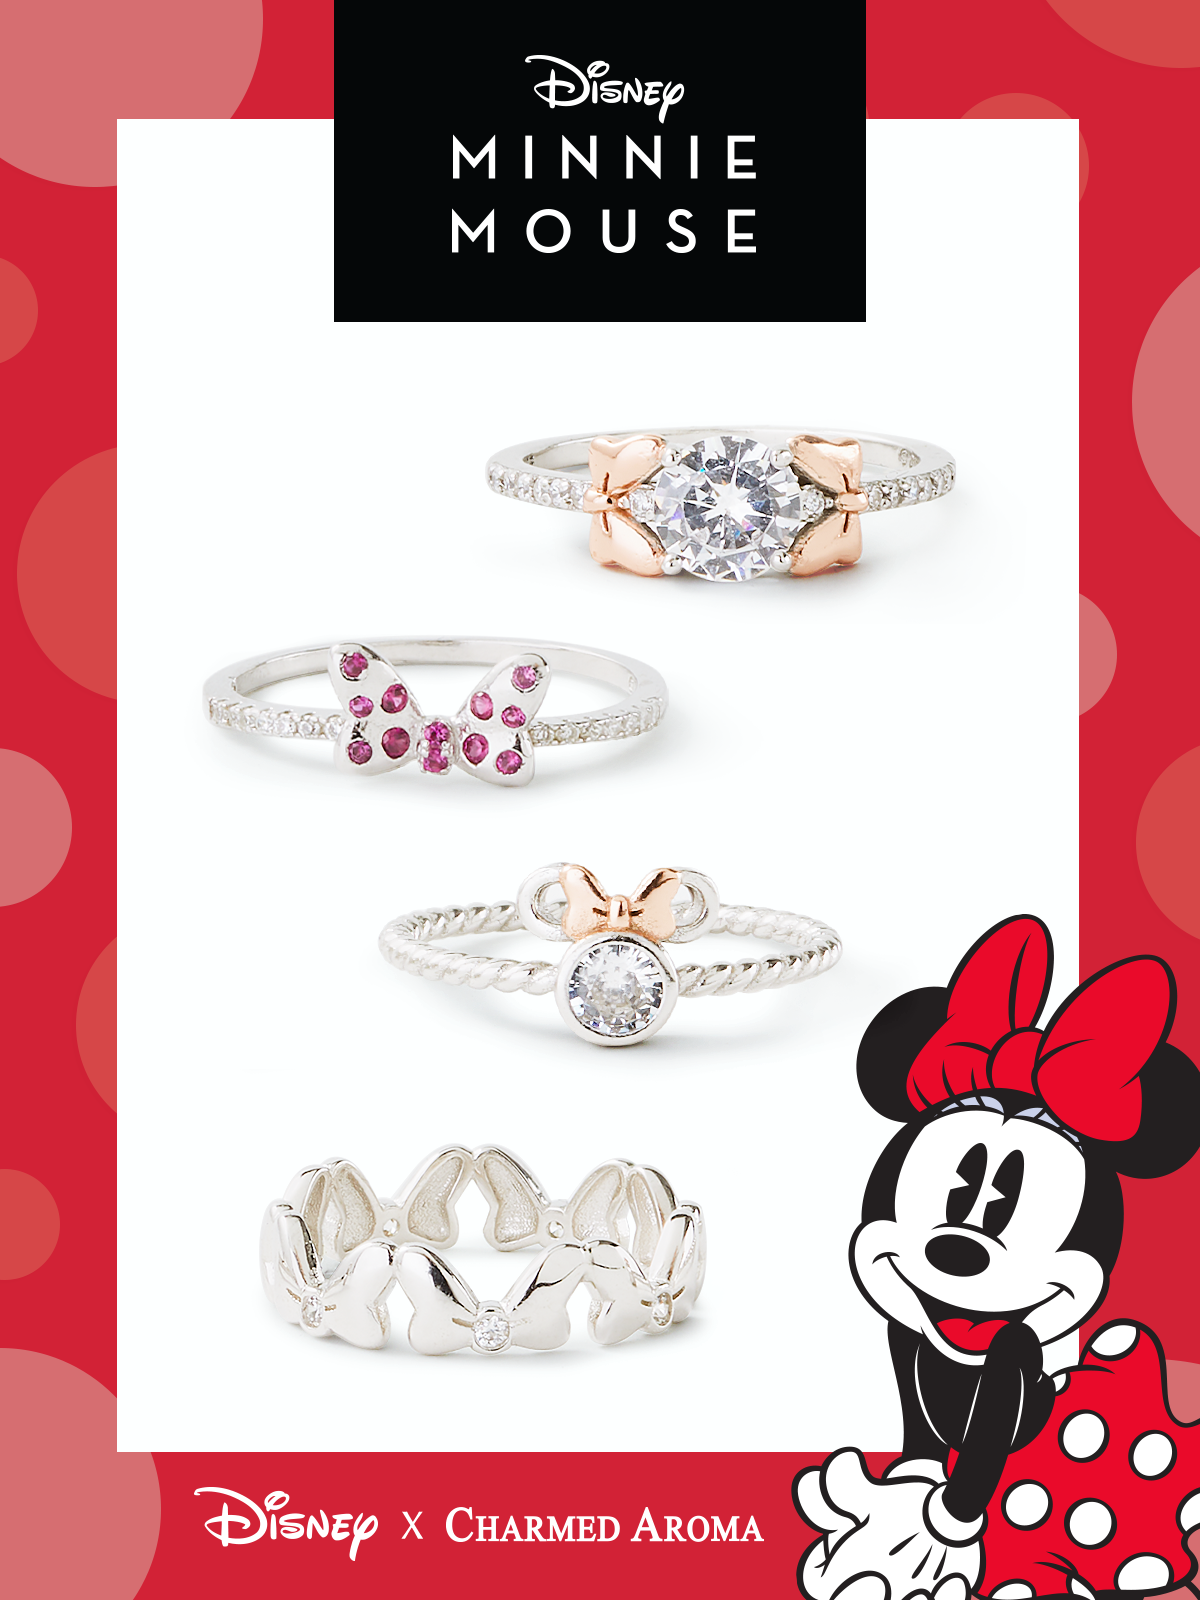 Disney Minnie Mouse Candle - 925 Sterling Silver Ring Collection